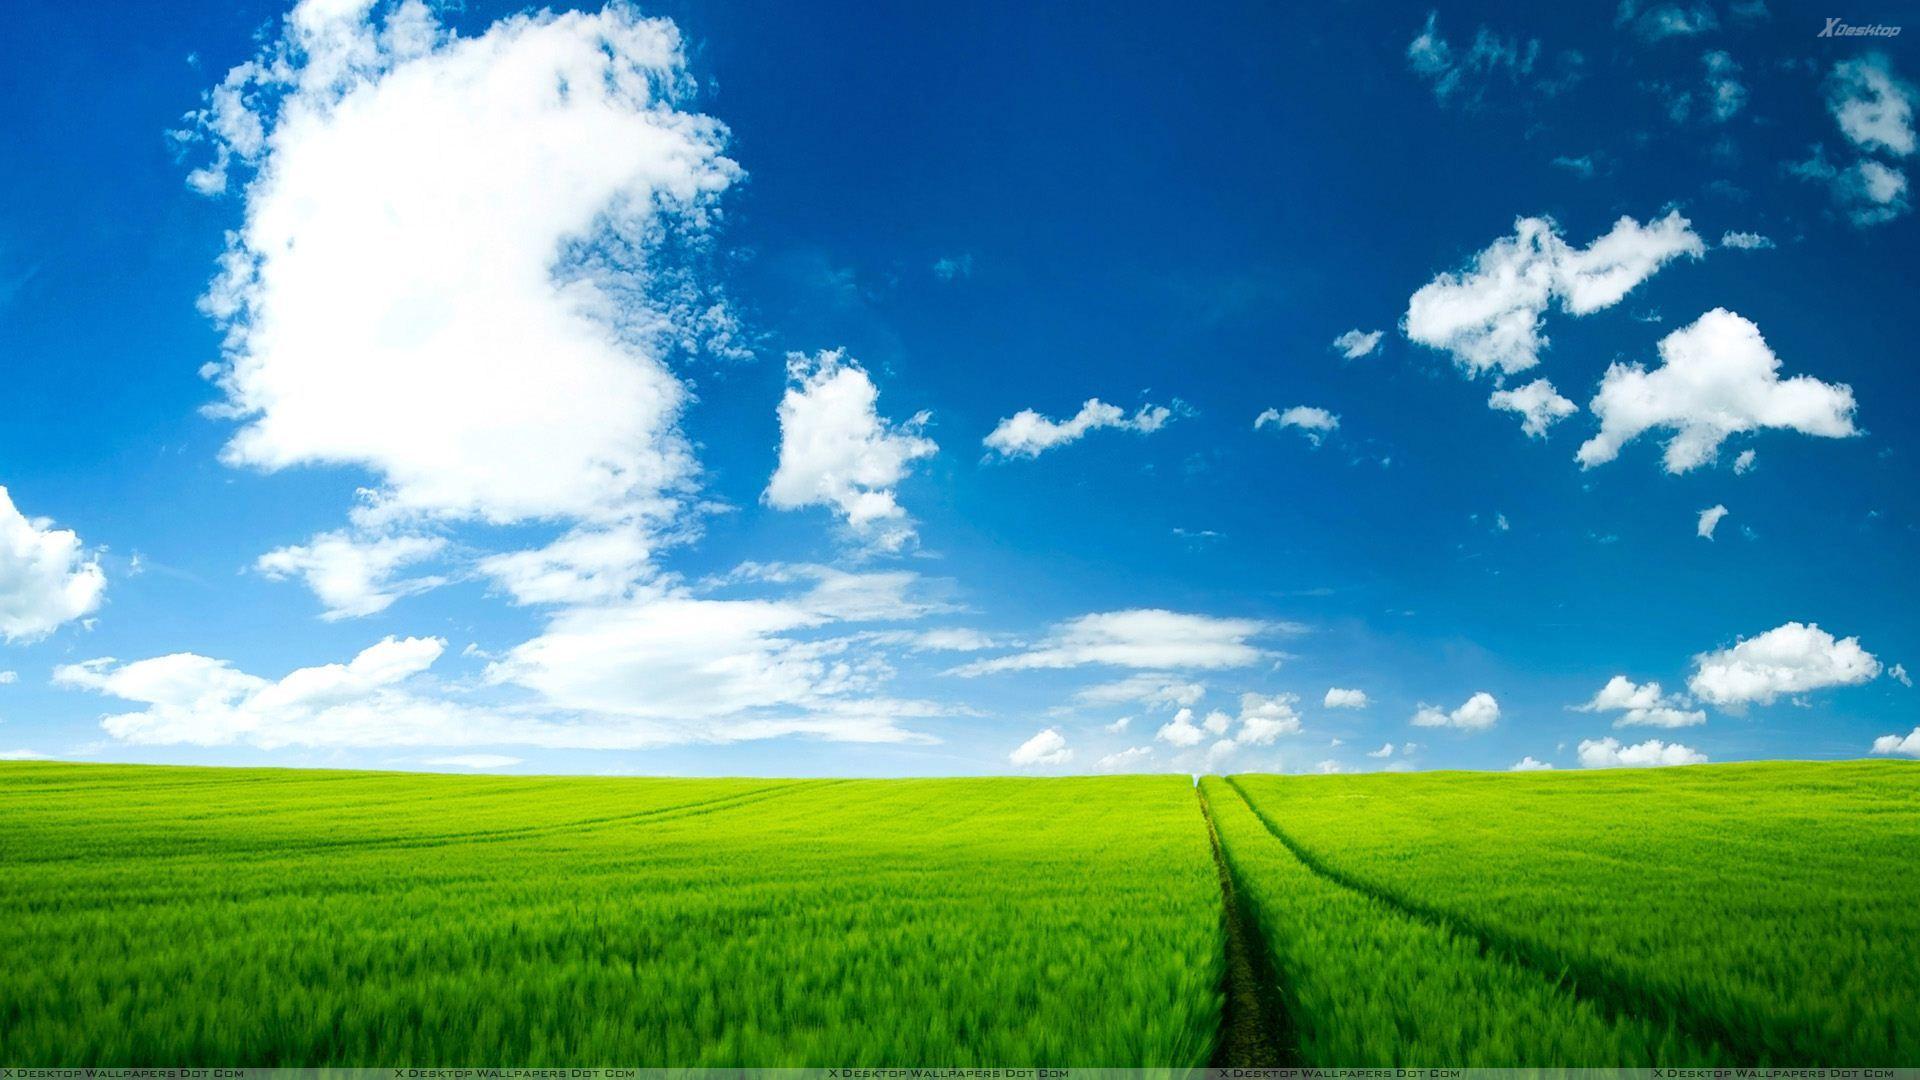 cool Summer Green Fields Background Image. Photo background image